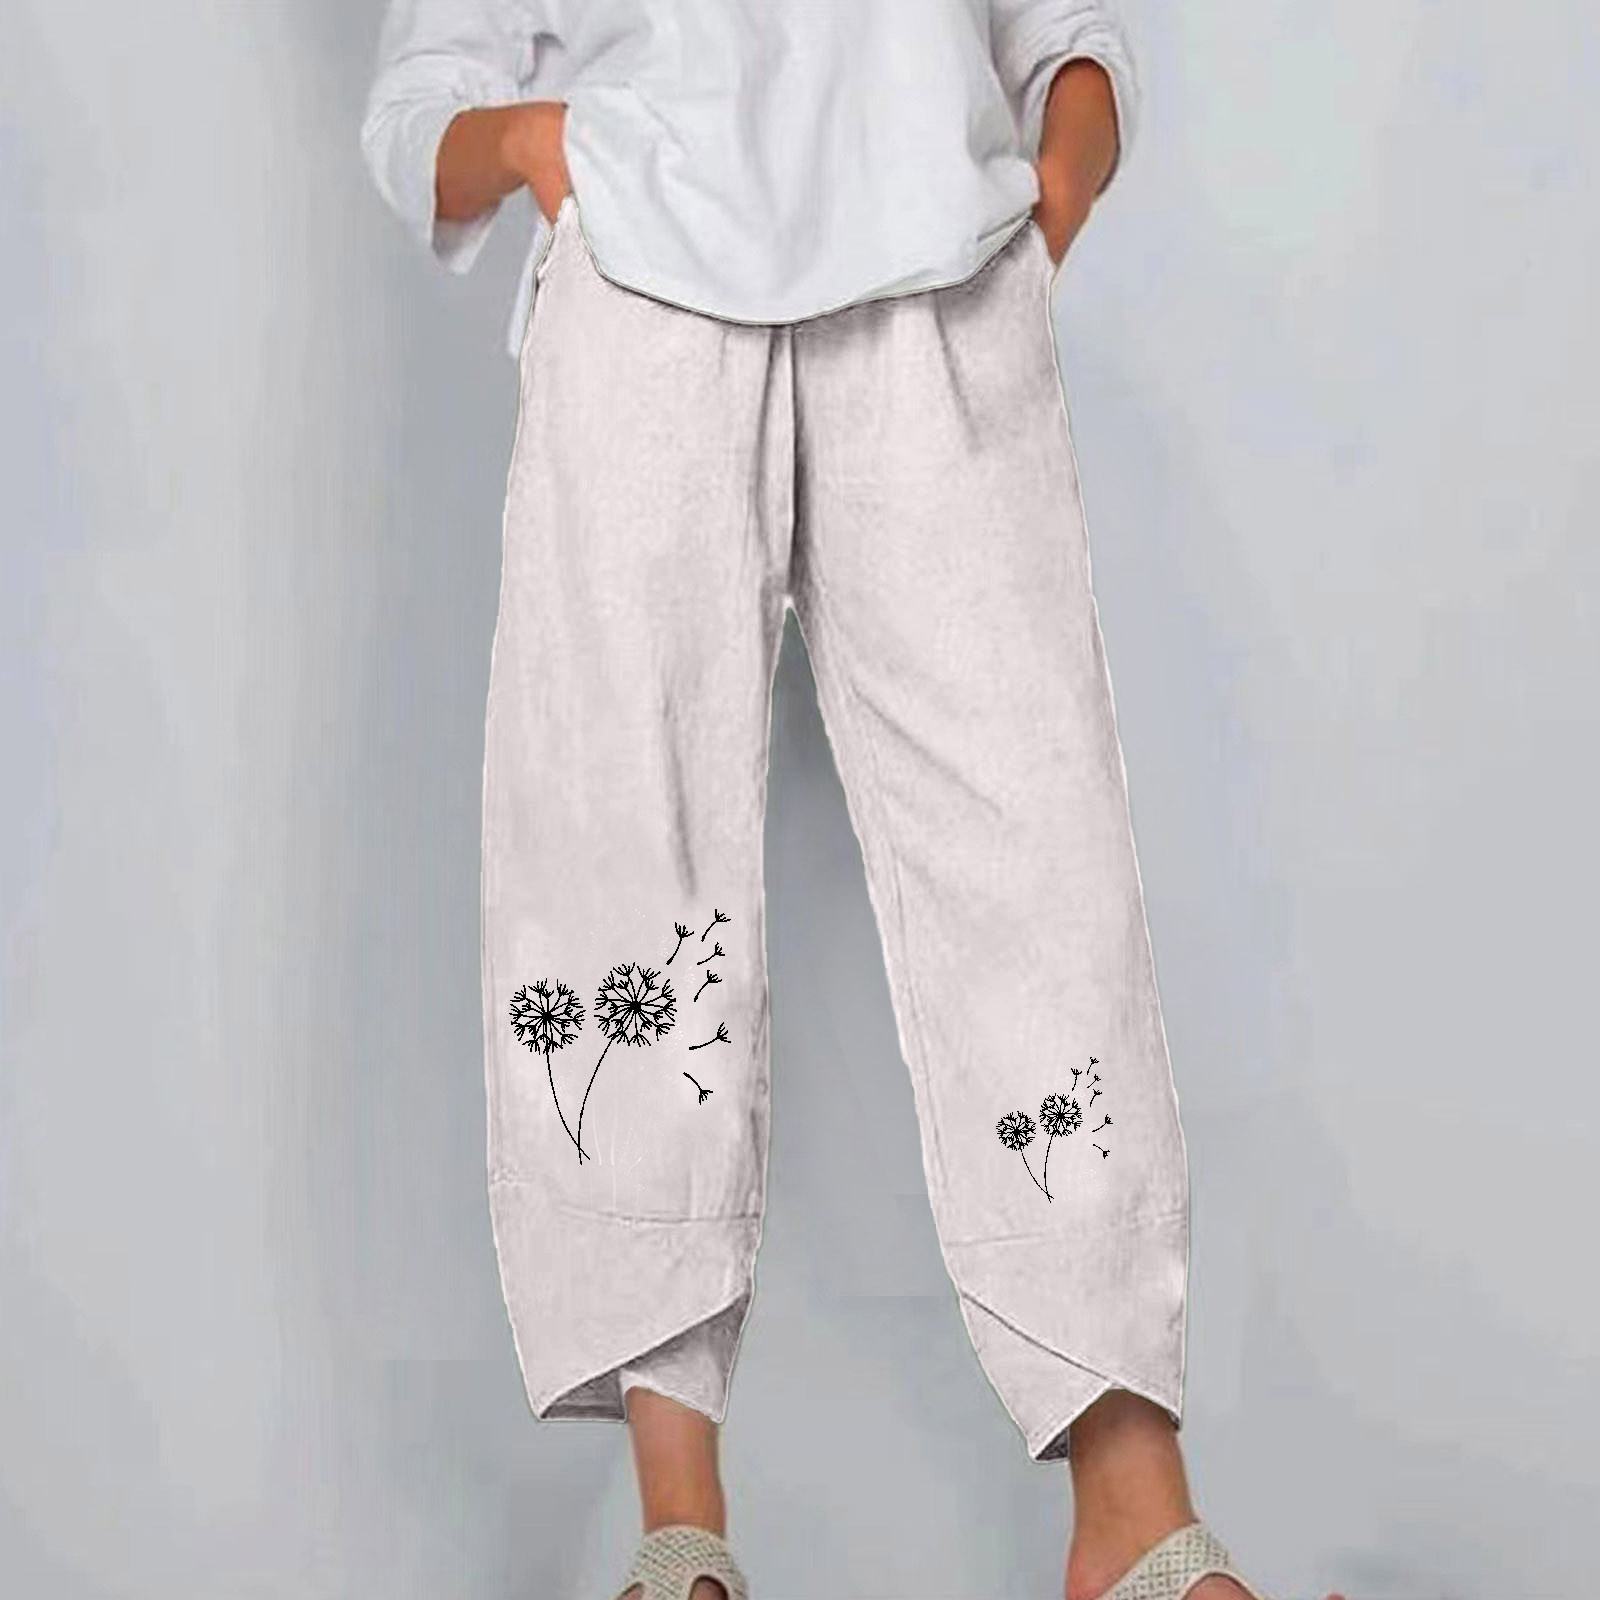 Tawop Womens Sweatpants Wide Leg Cotton Linen Casual with Pockets Baggy ...